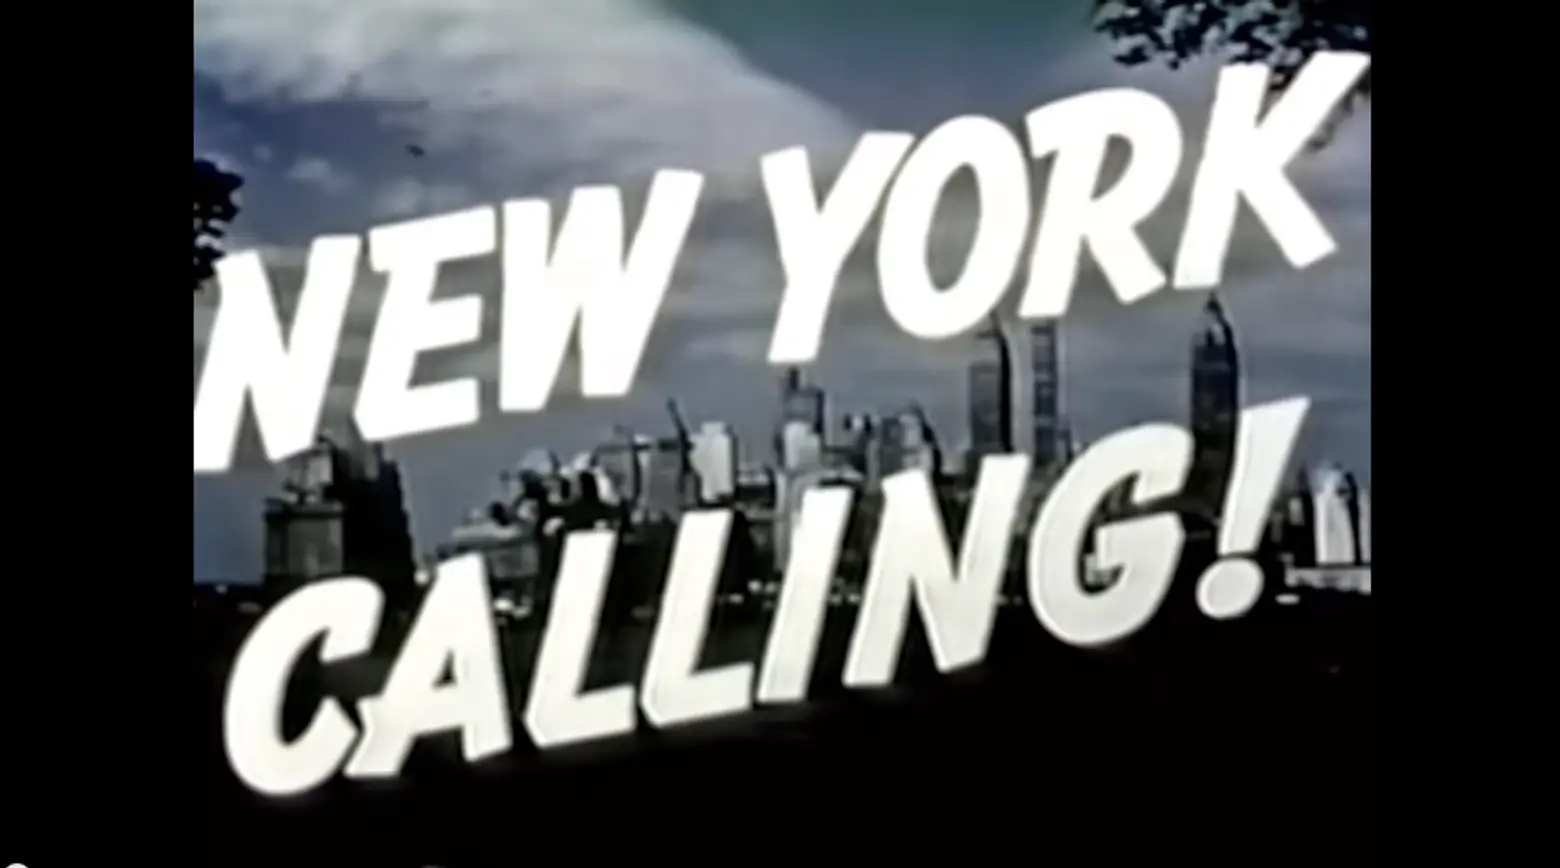 VIDEO: What to Expect if You Were a Tourist Visiting NYC in the 1940s